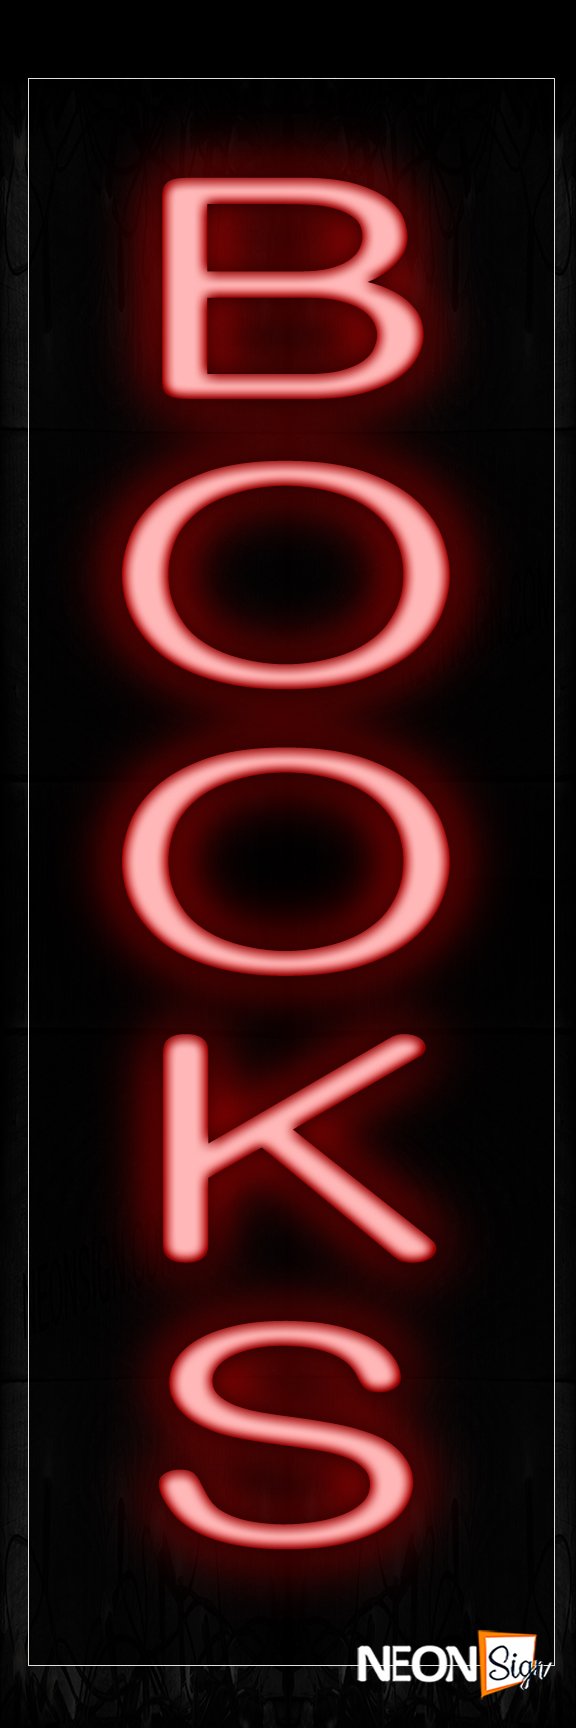 Image of 12203 Books In Red (Vertical) Neon Signs_8x24 Black Backing